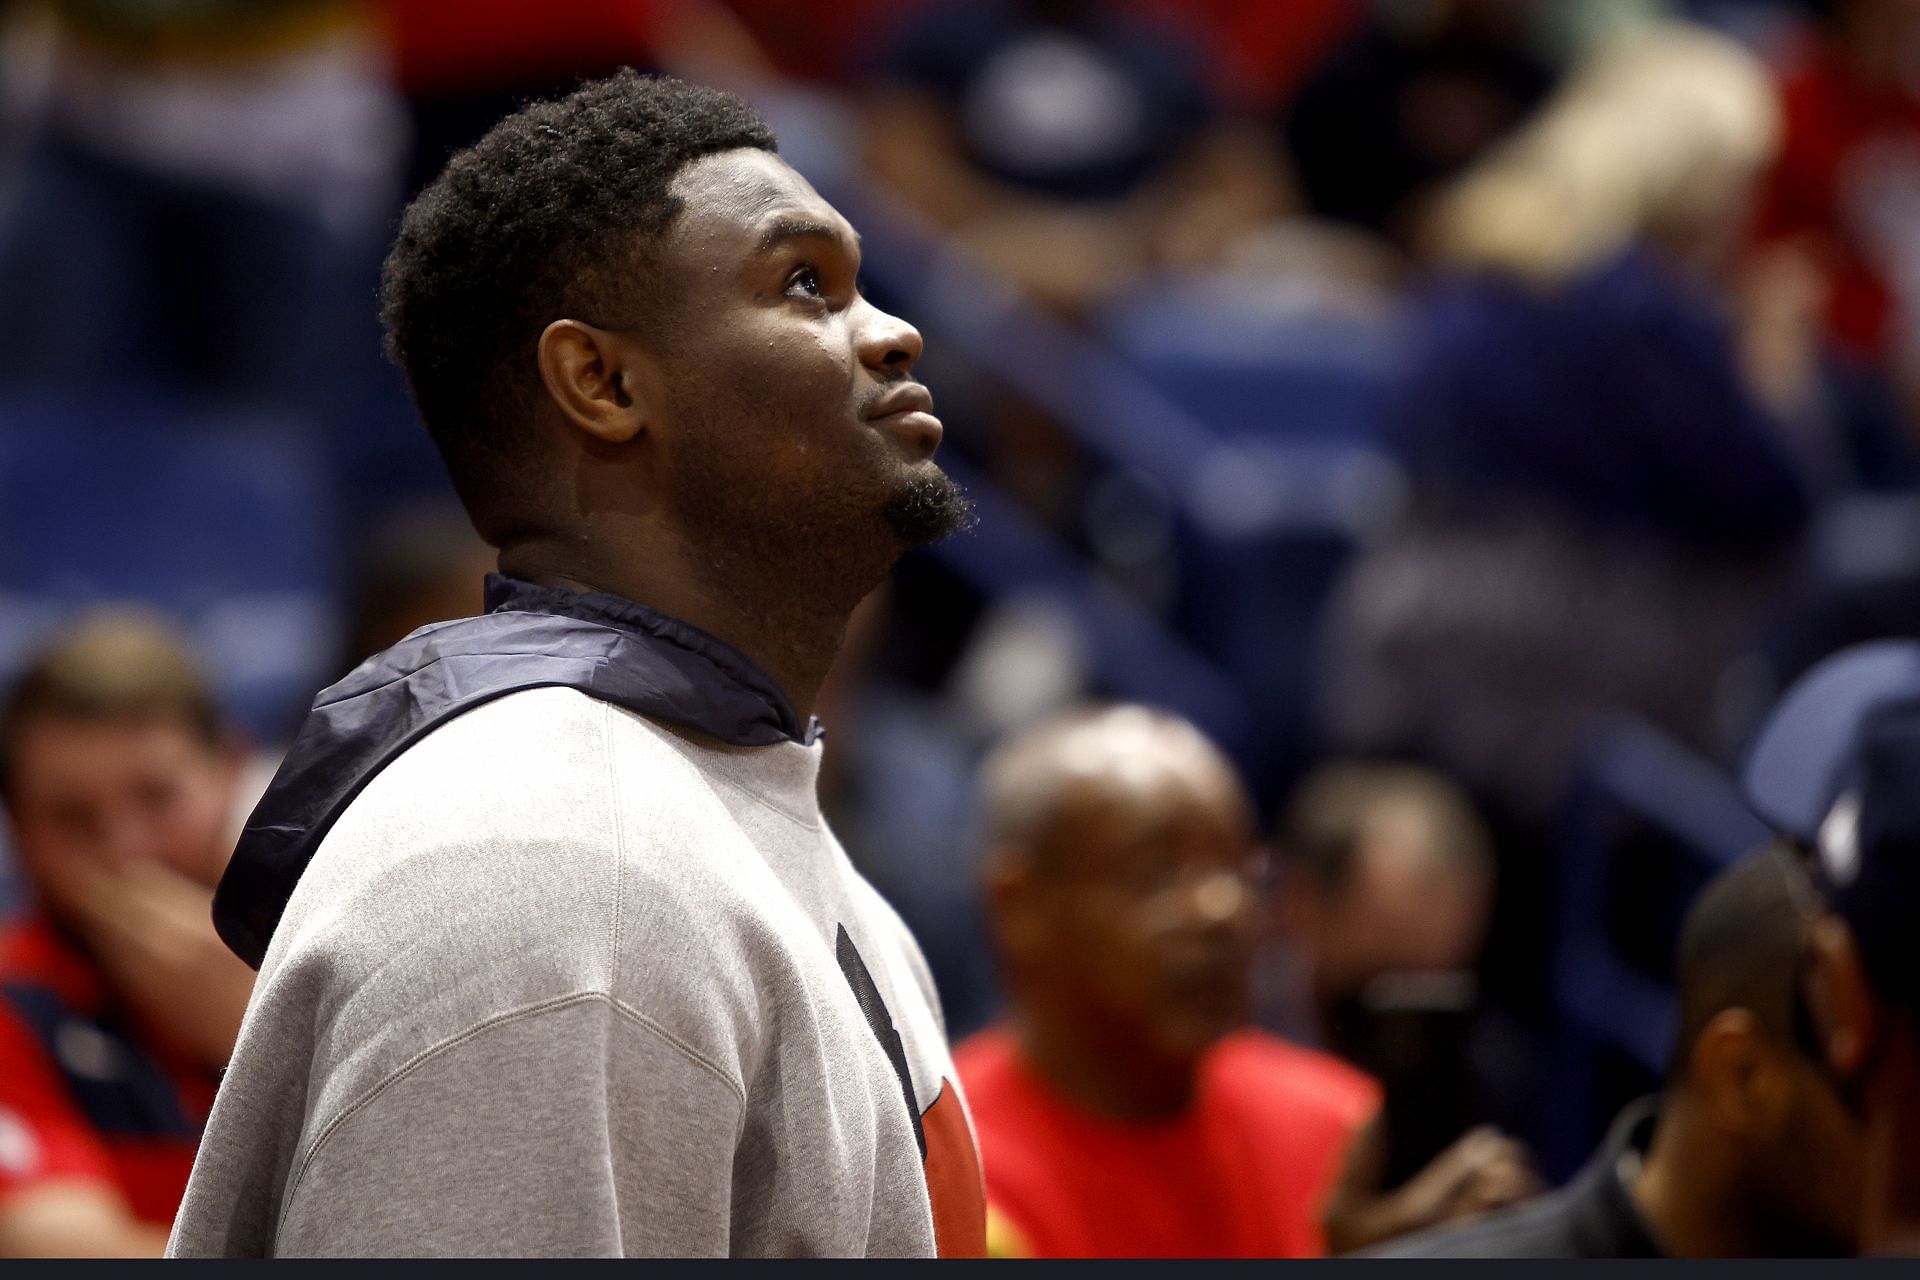 Zion Williamson in attendance at a New Orleans Pelicans game